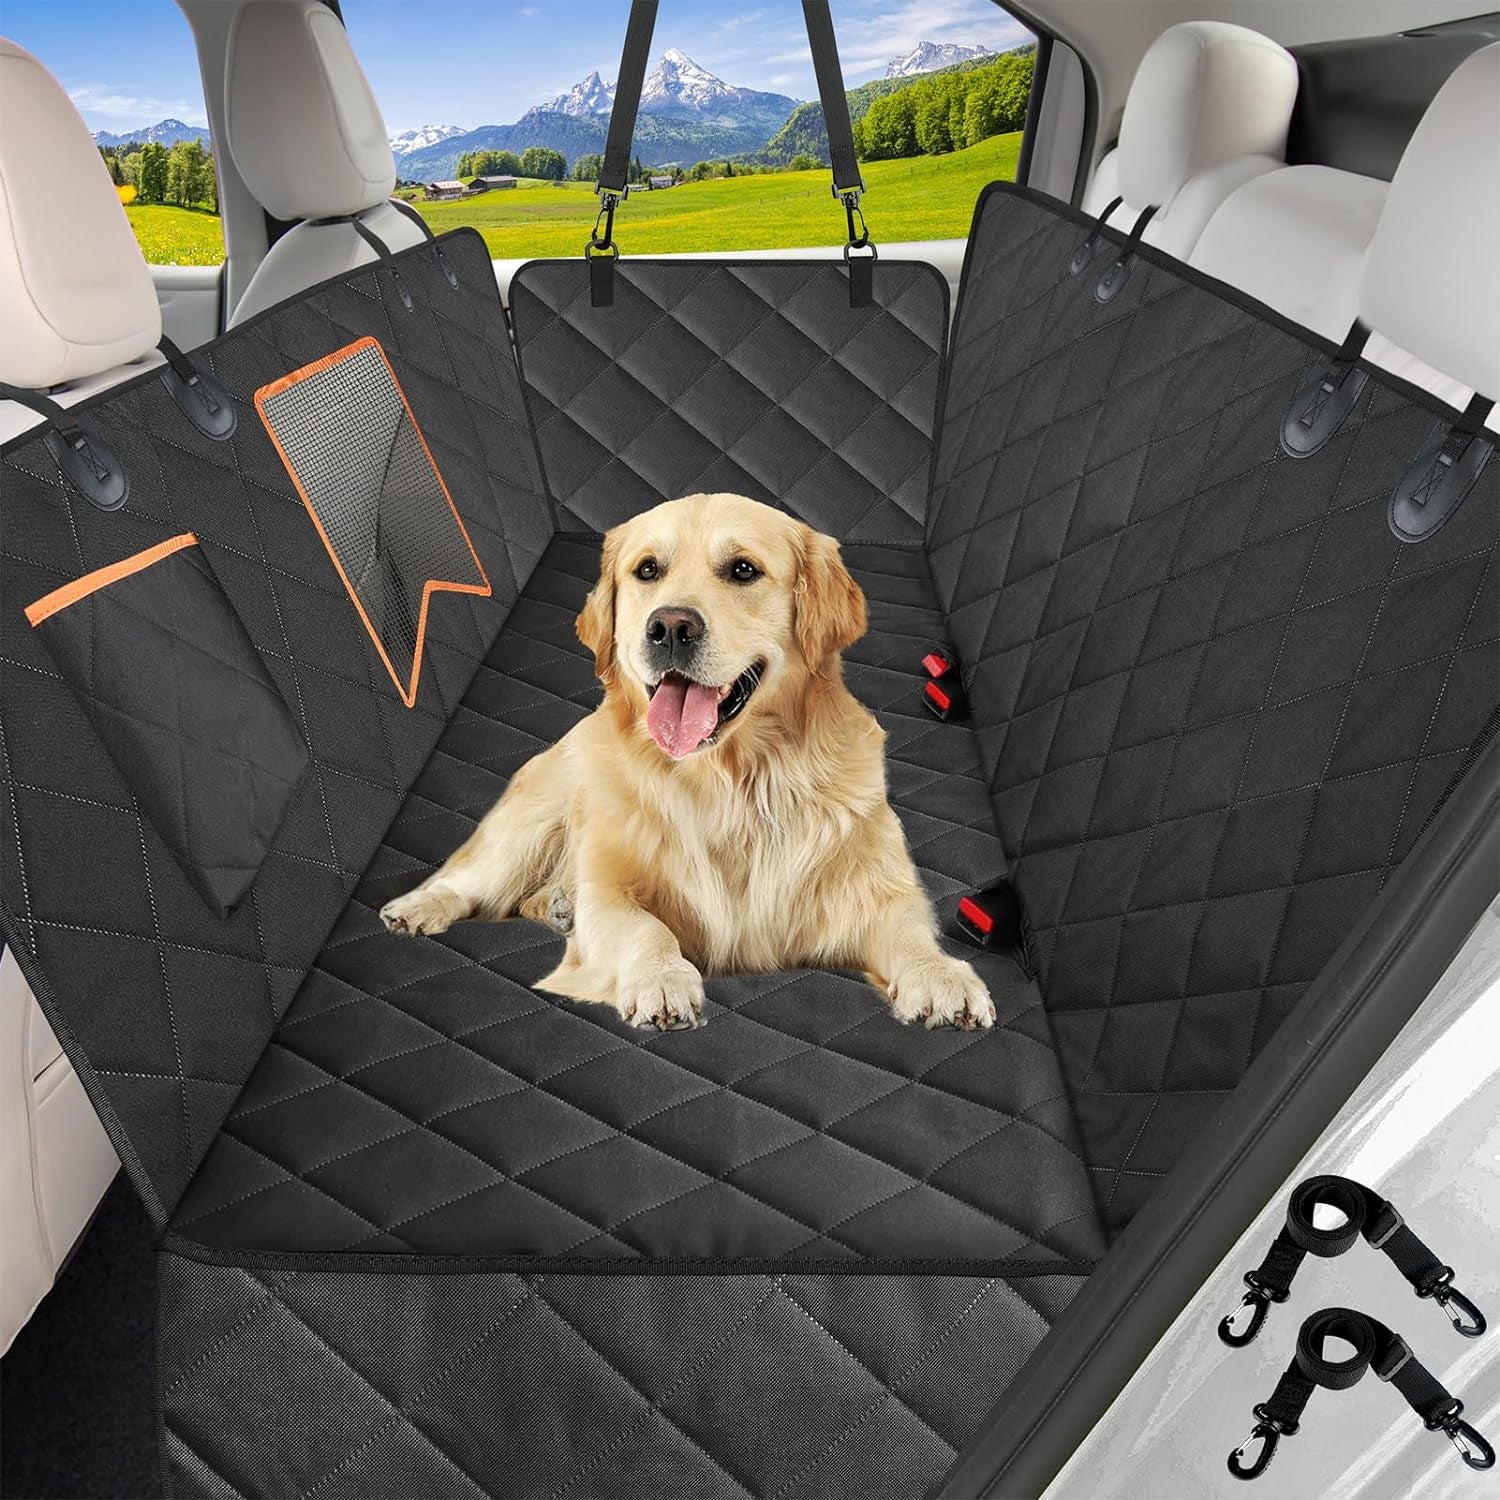 Dog Car Seat Cover for Back Seat, 100% Waterproof Dog Seat Cover with Mesh Window, Anti-Scratch Nonslip Durable Soft Pet Dog Car Hammock for Cars Trucks and SUV